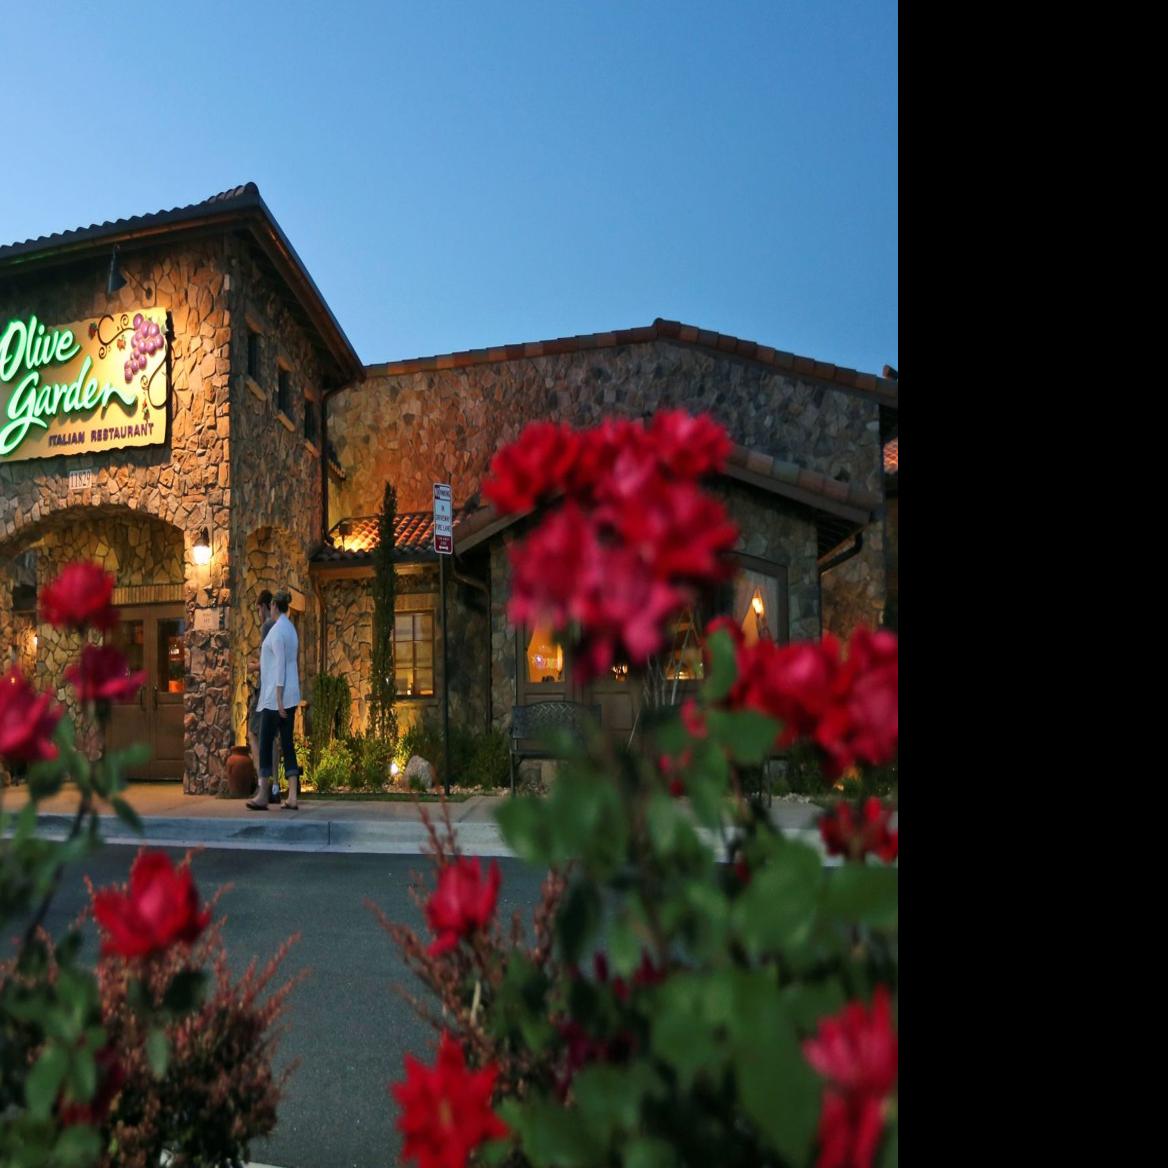 Why No Olive Garden It S Complicated Charlottesville Biz